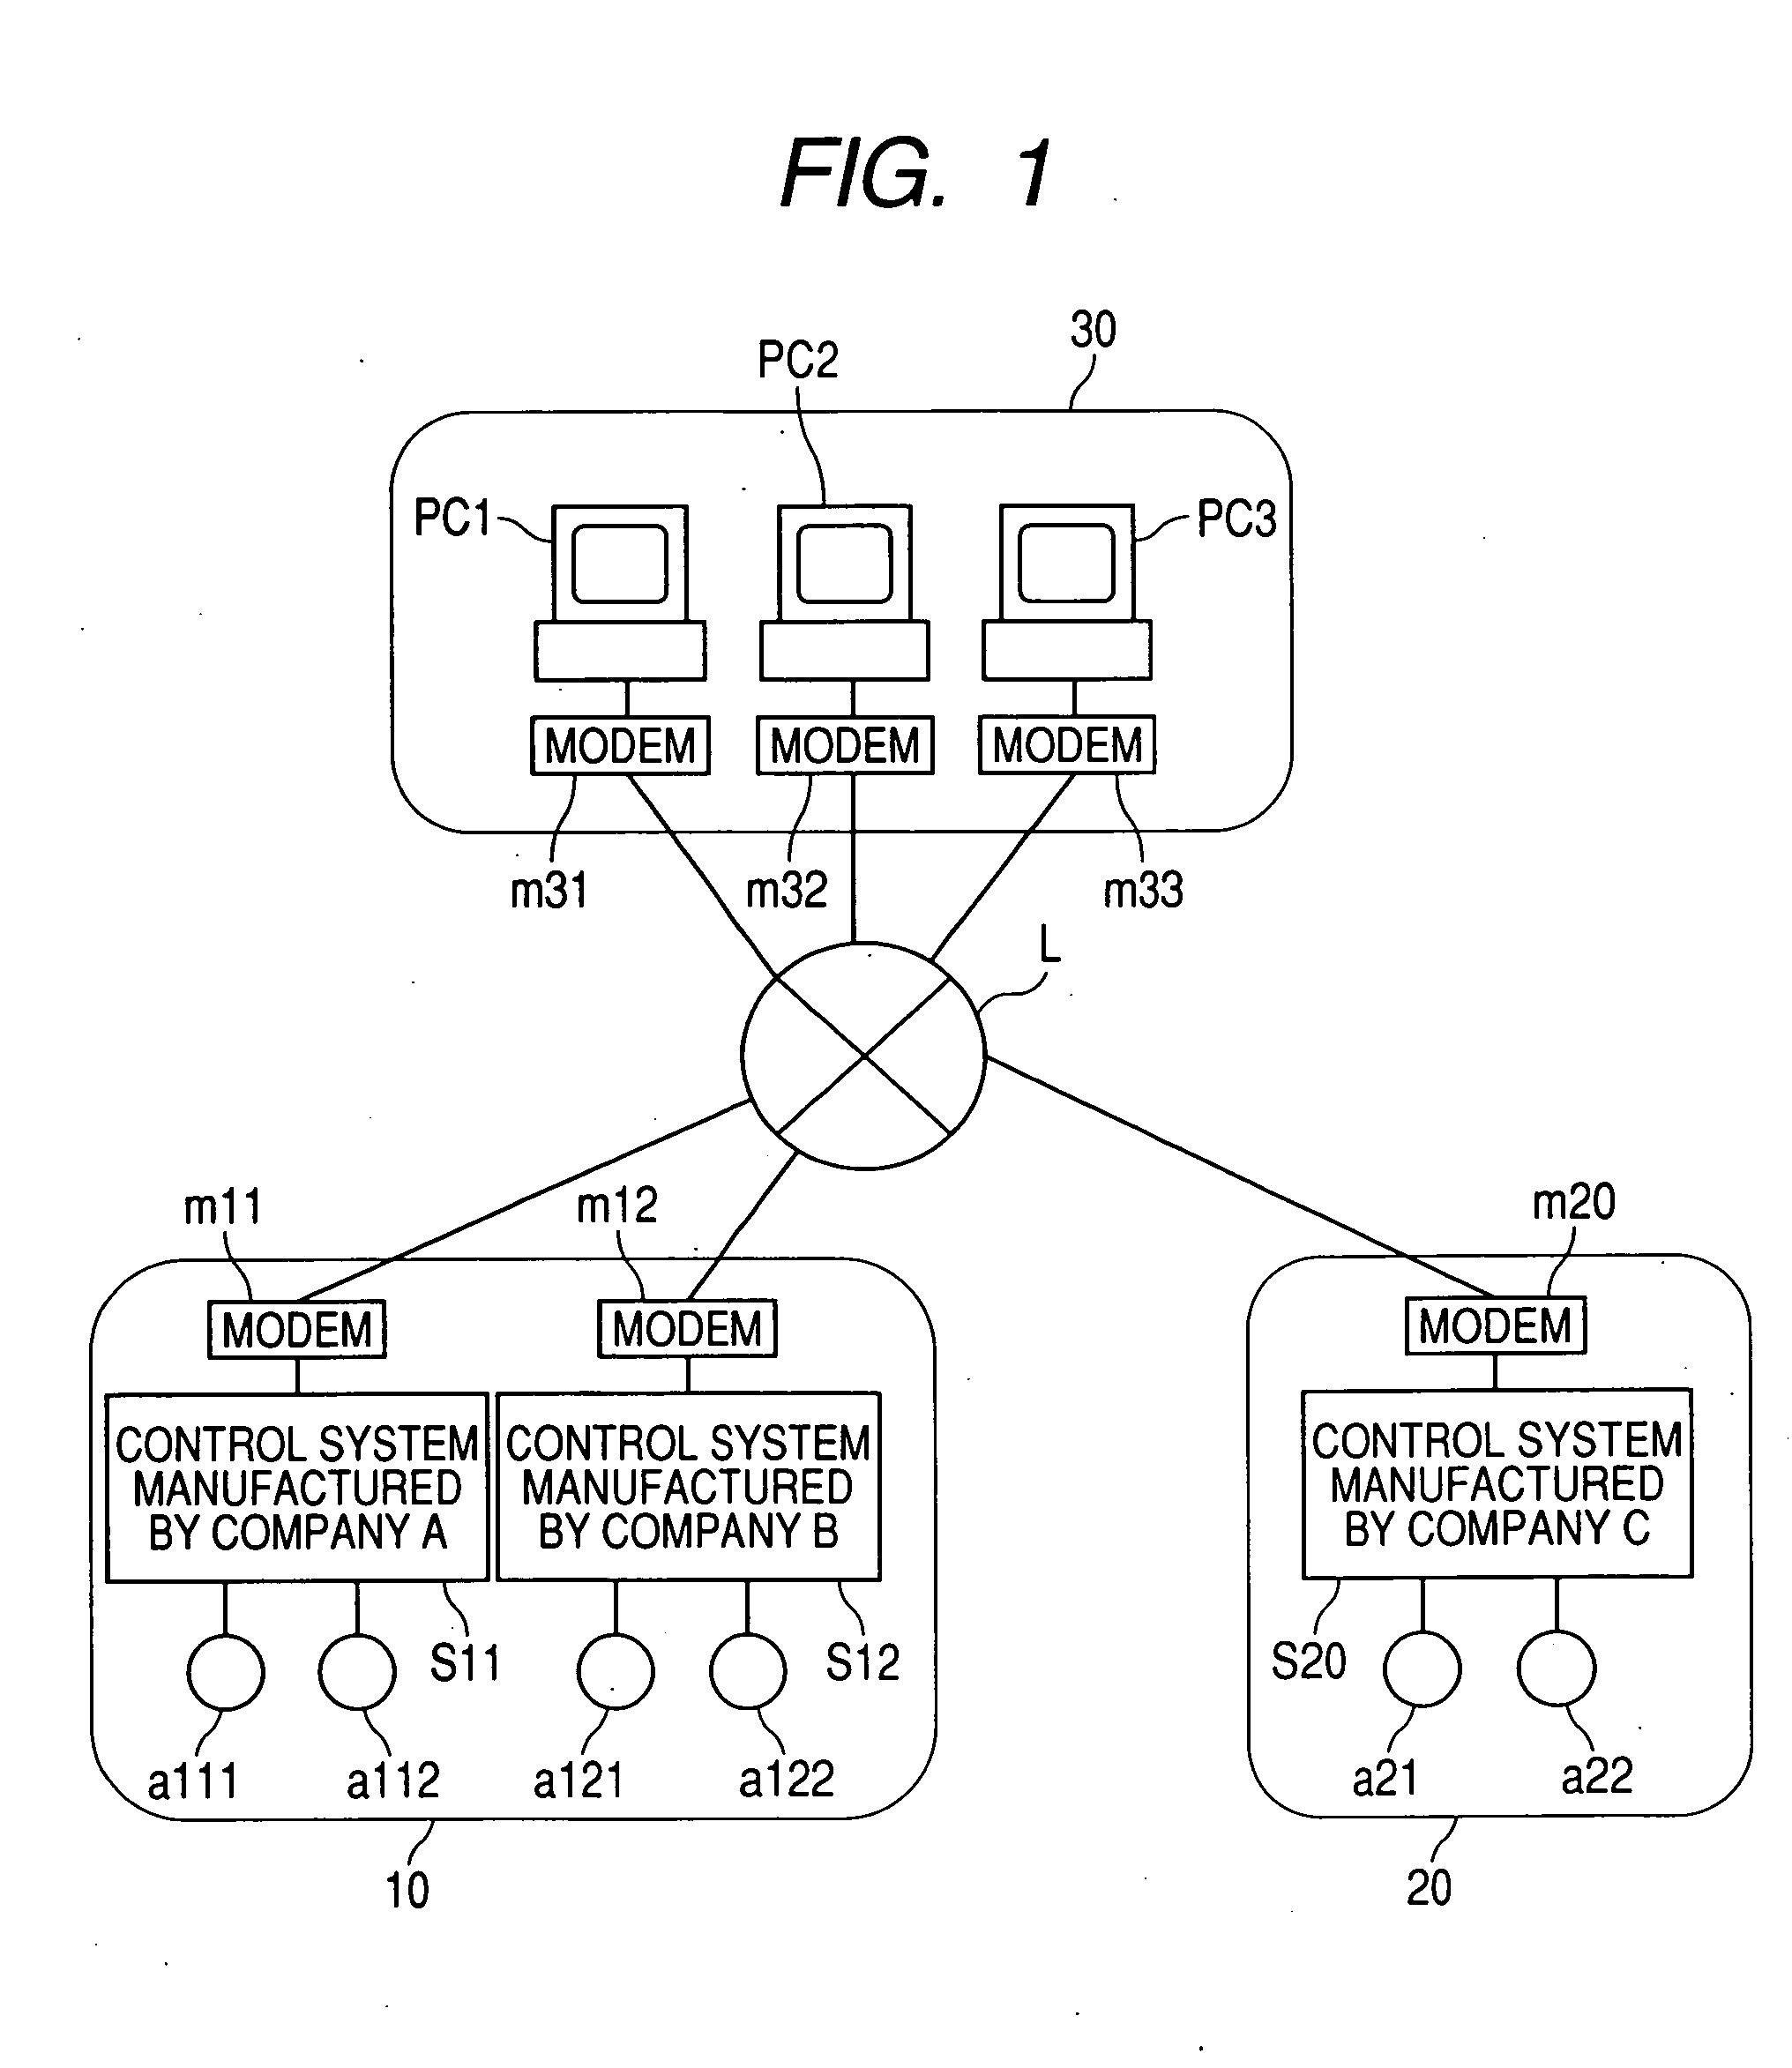 Signal relay device, communication network system and operation system